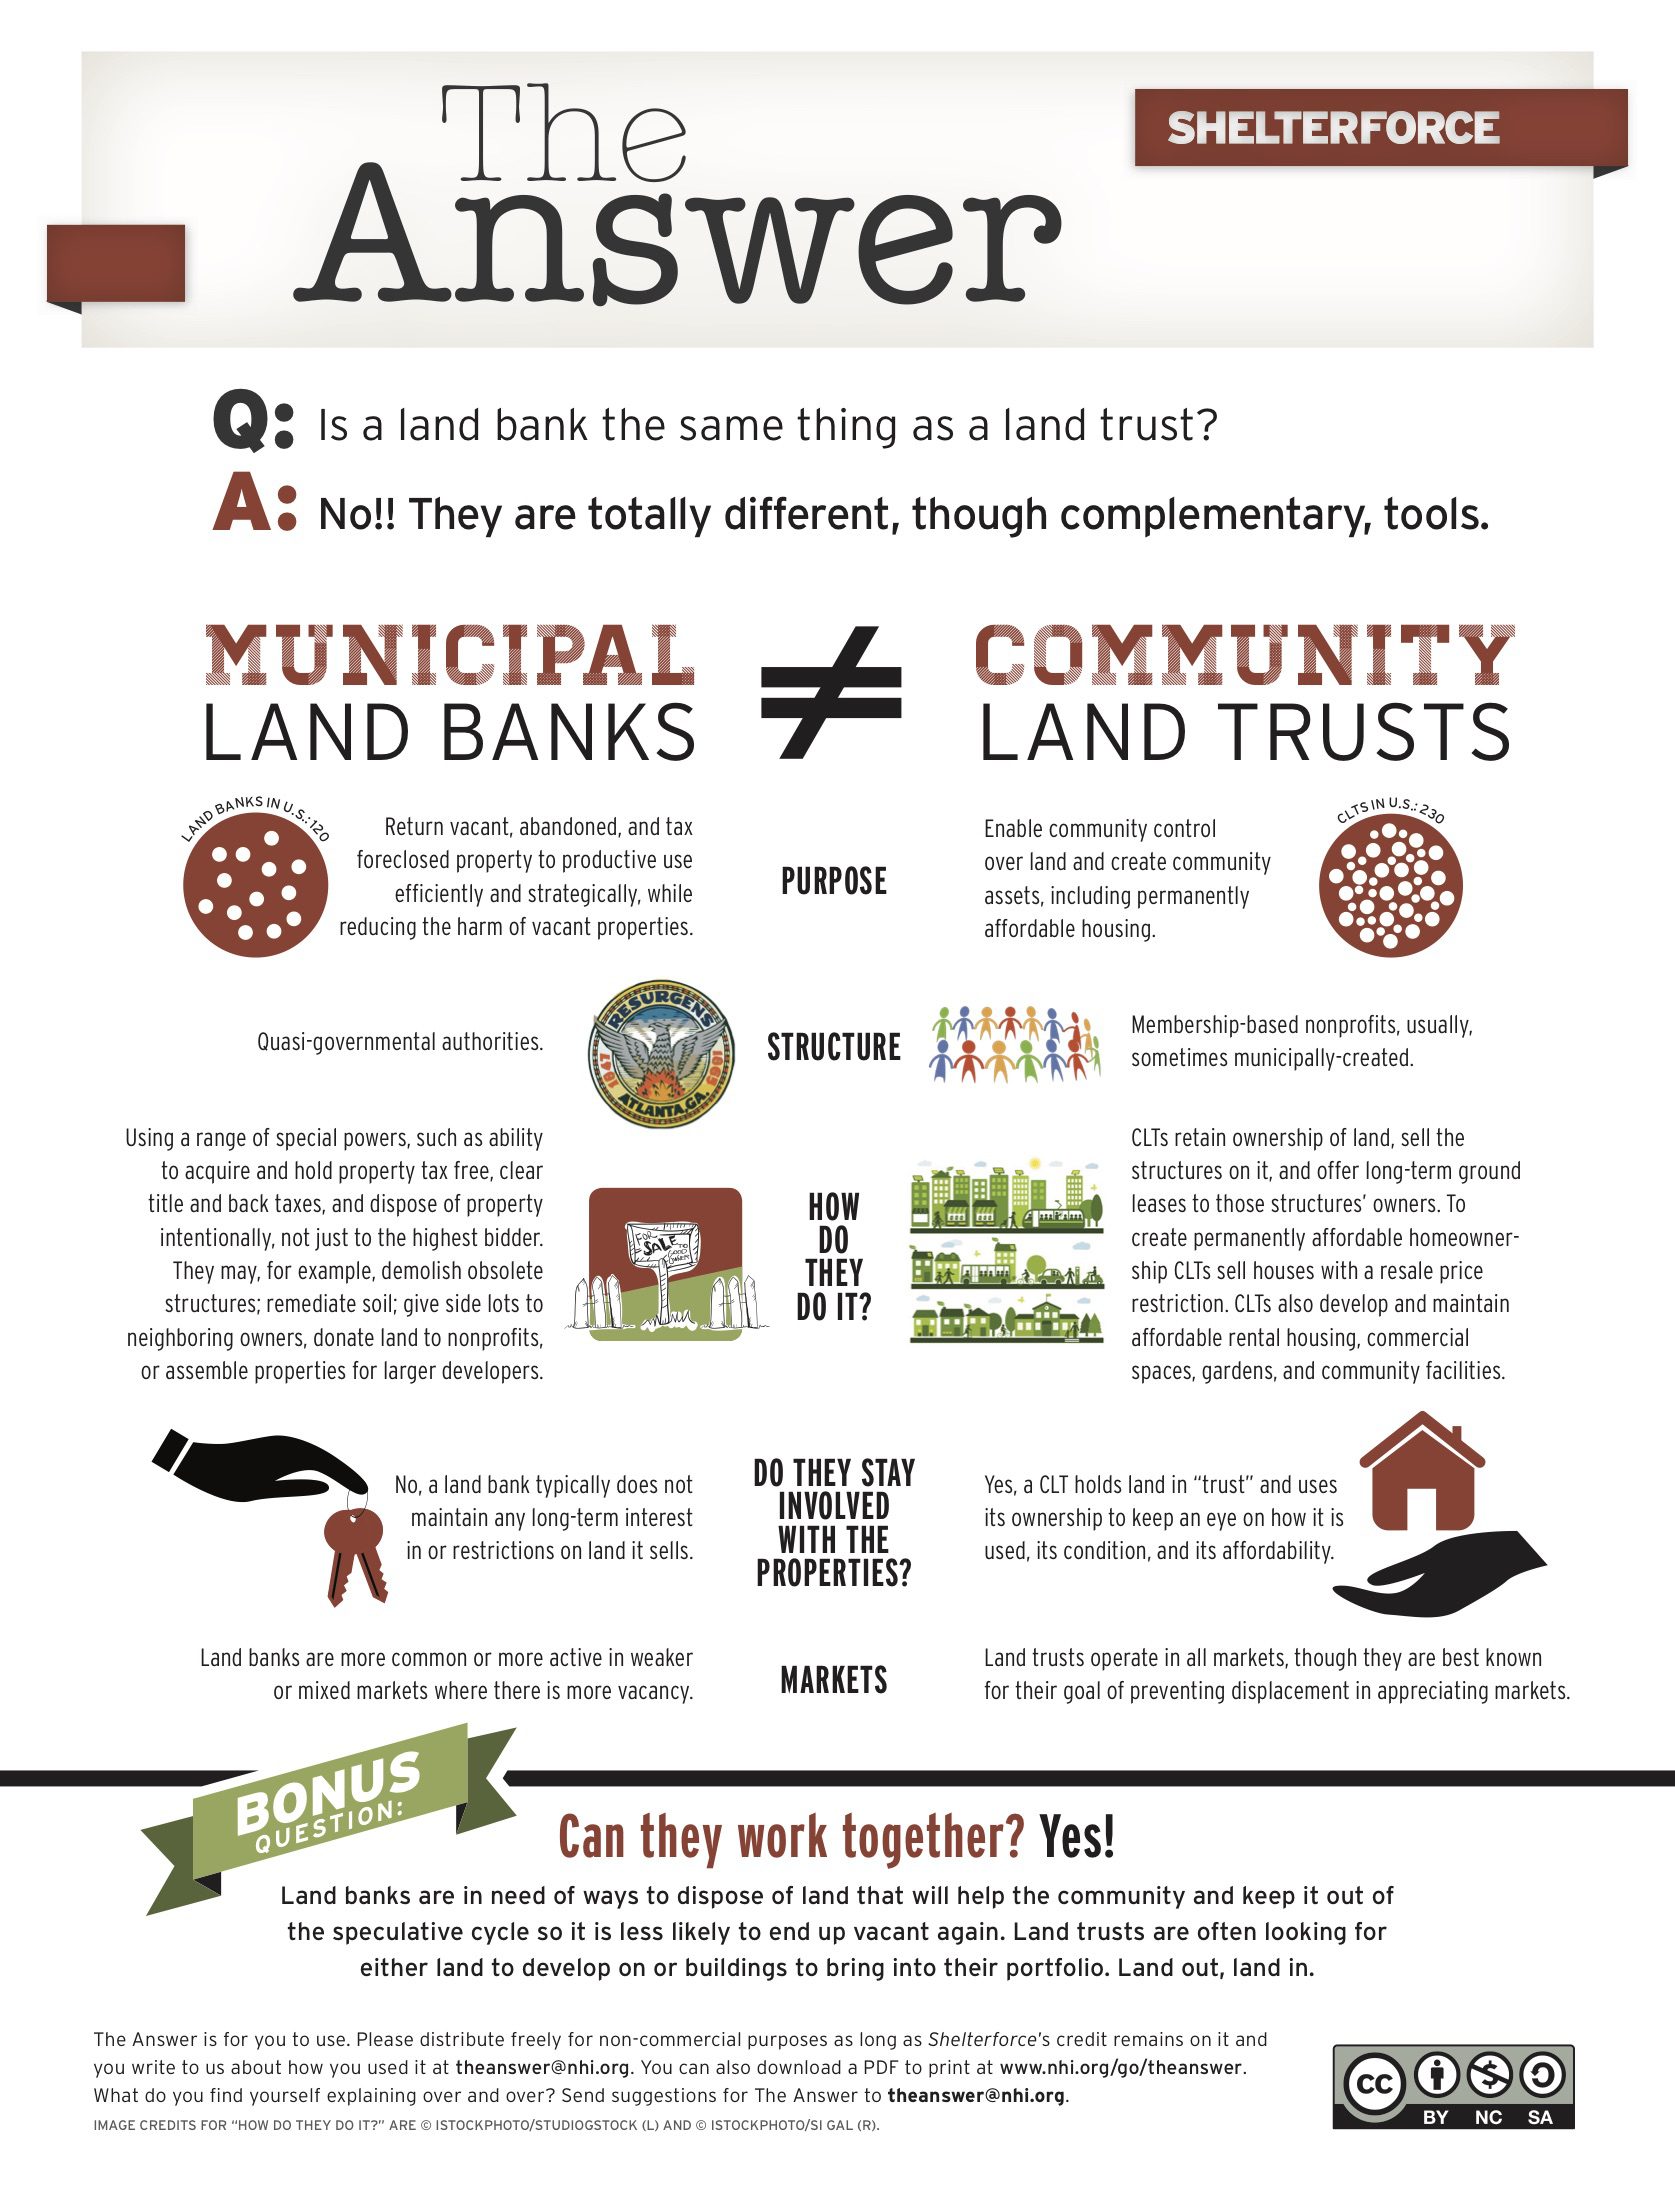 One-pager showing differences between municipal land banks and community land trusts. Image links to pdf version.